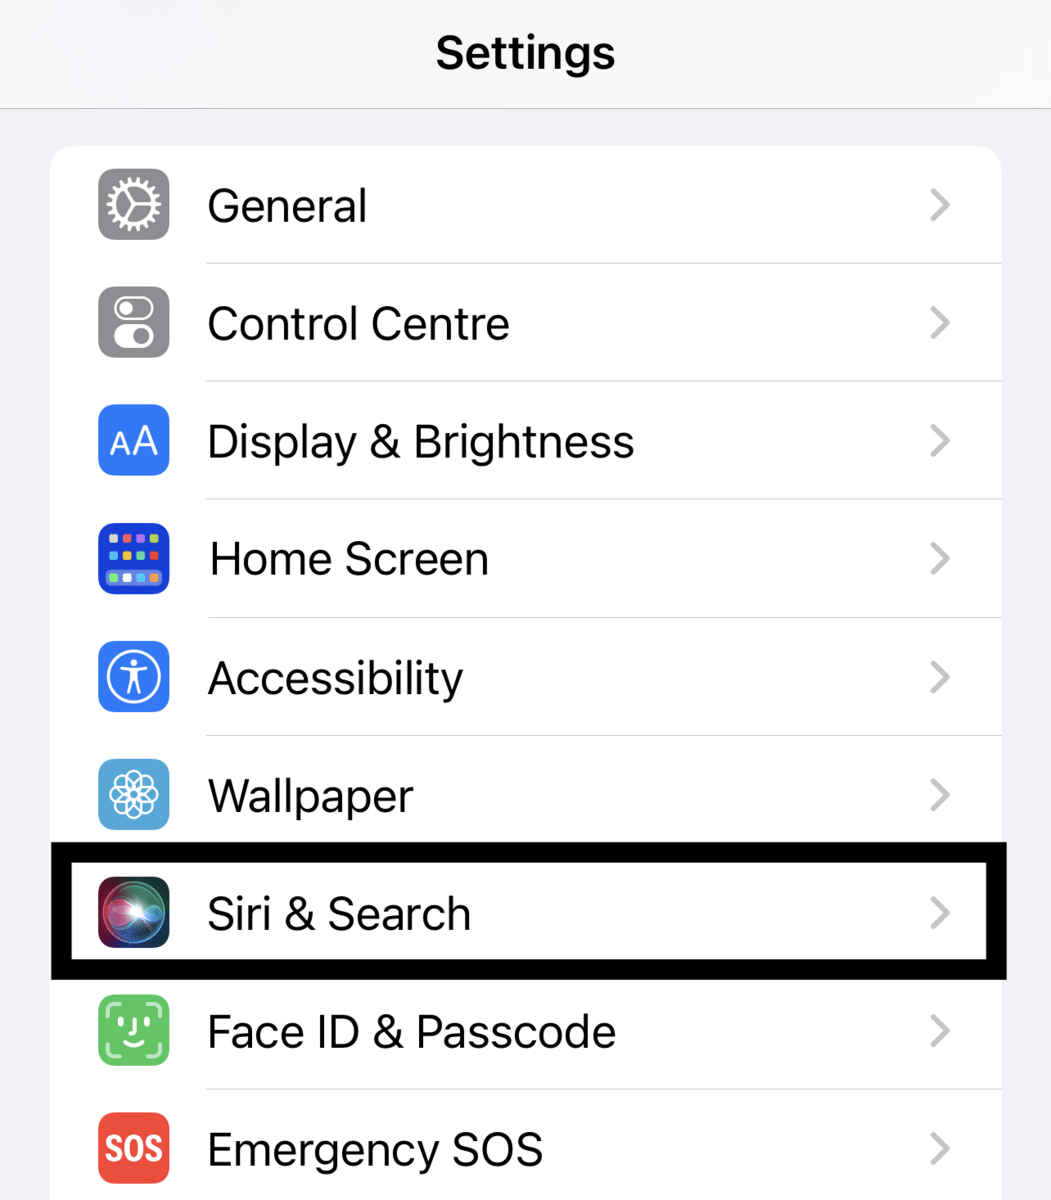 ensure siri is turned on to fix the "Unable to Connect Apple Carplay" error